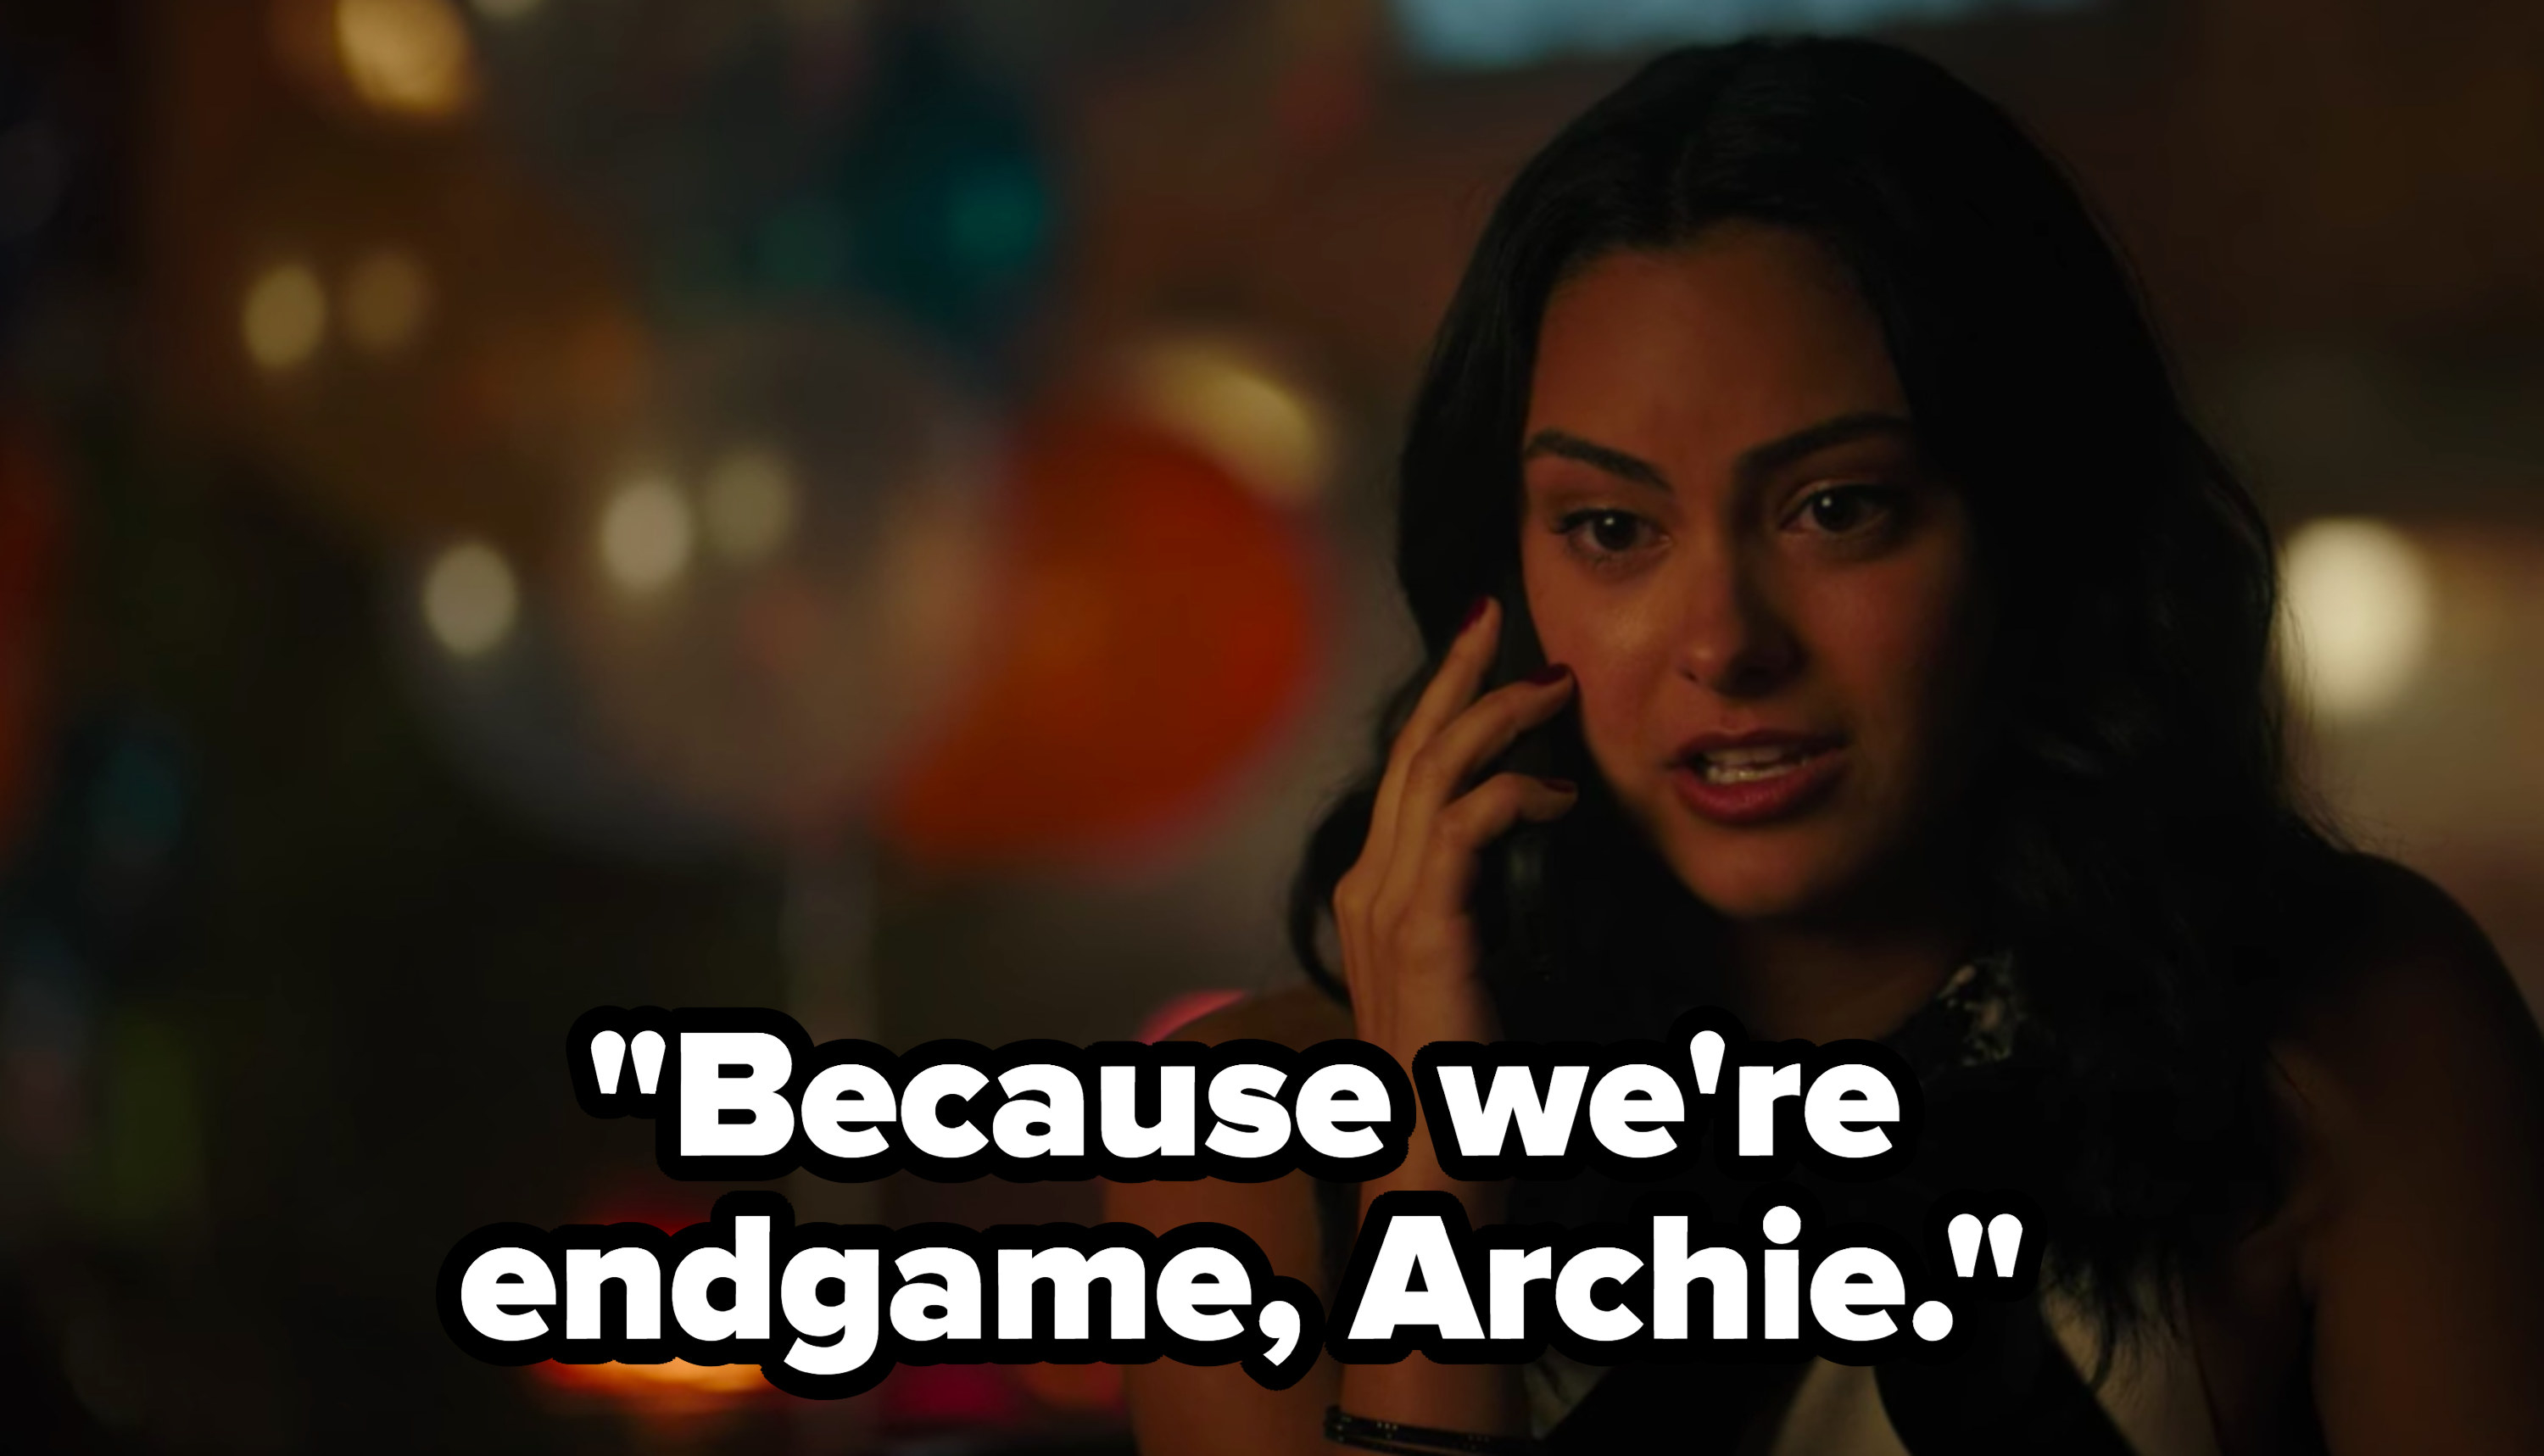 Veronica says she and Archie are &quot;endgame&quot;